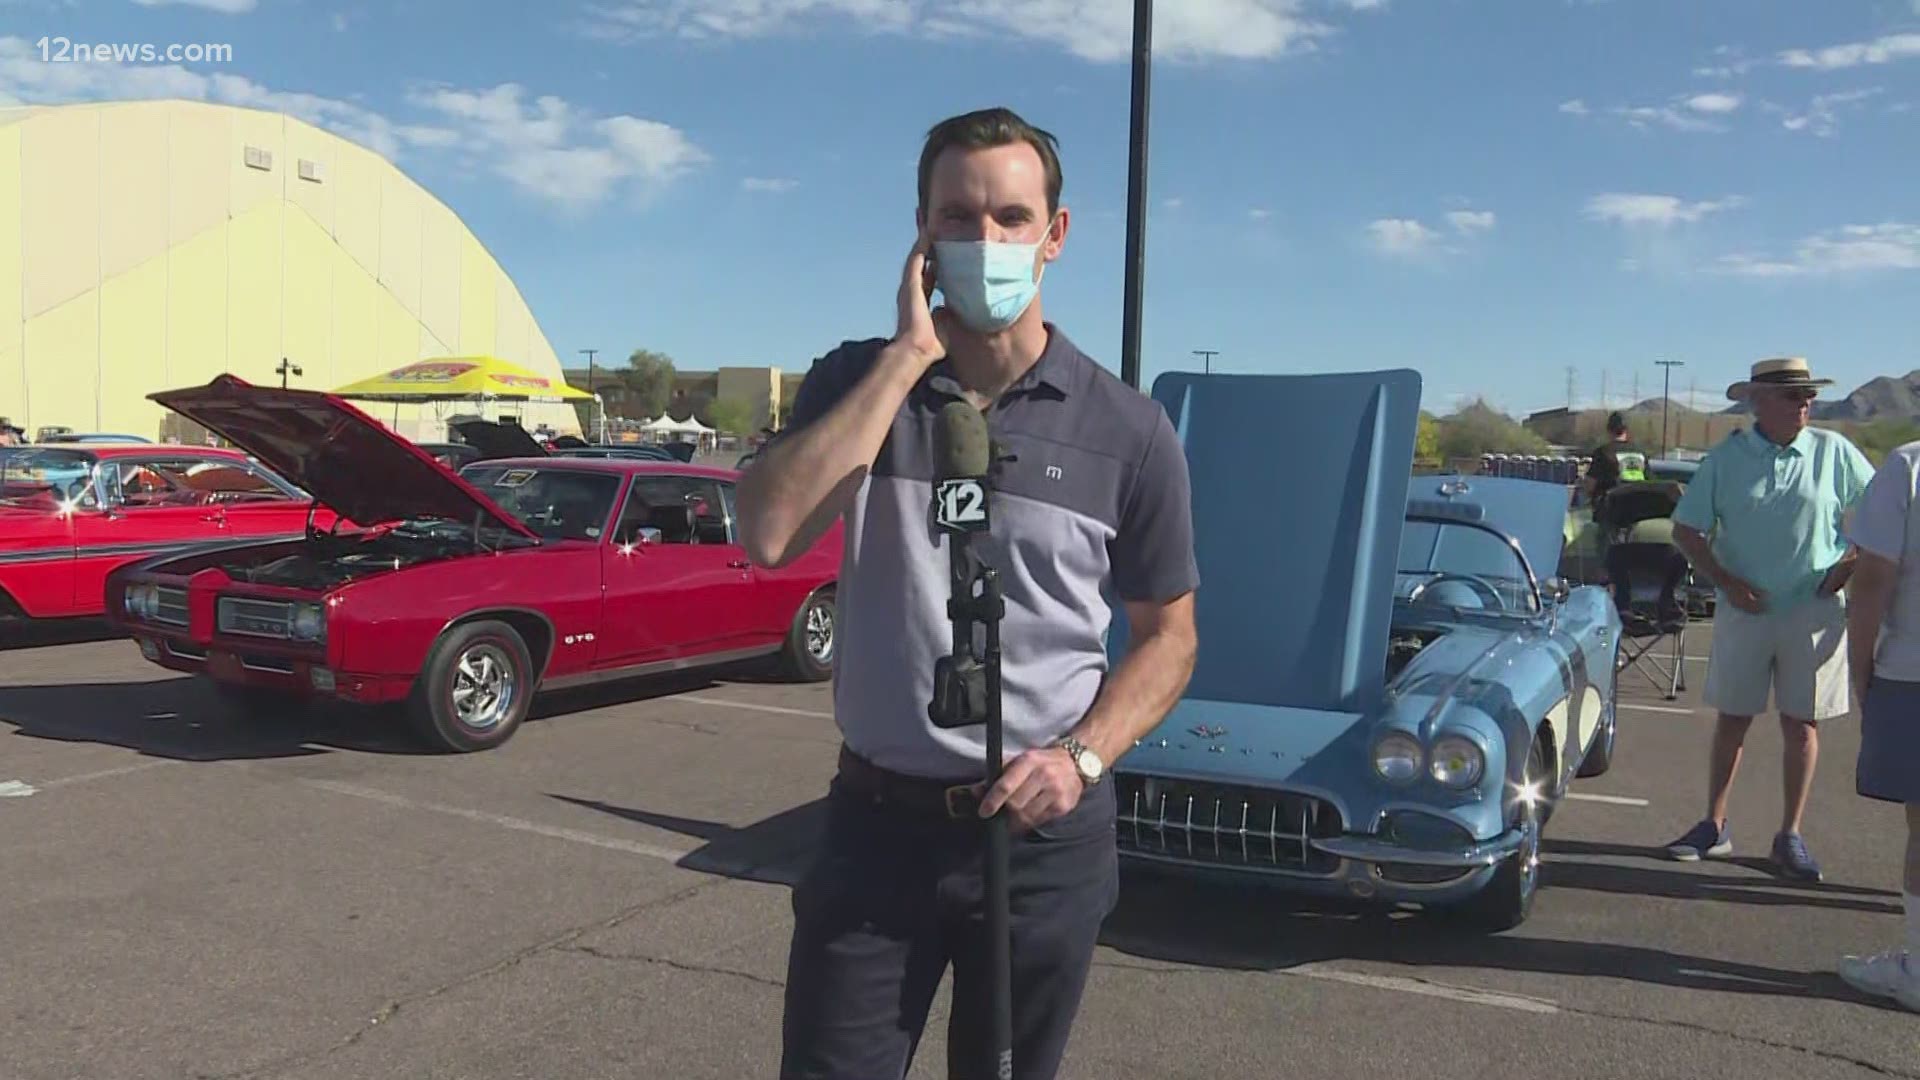 Cars of all kinds are competiing up at the Good Guys Car Show at Westworld Sunday. Matt Yurus has the details.